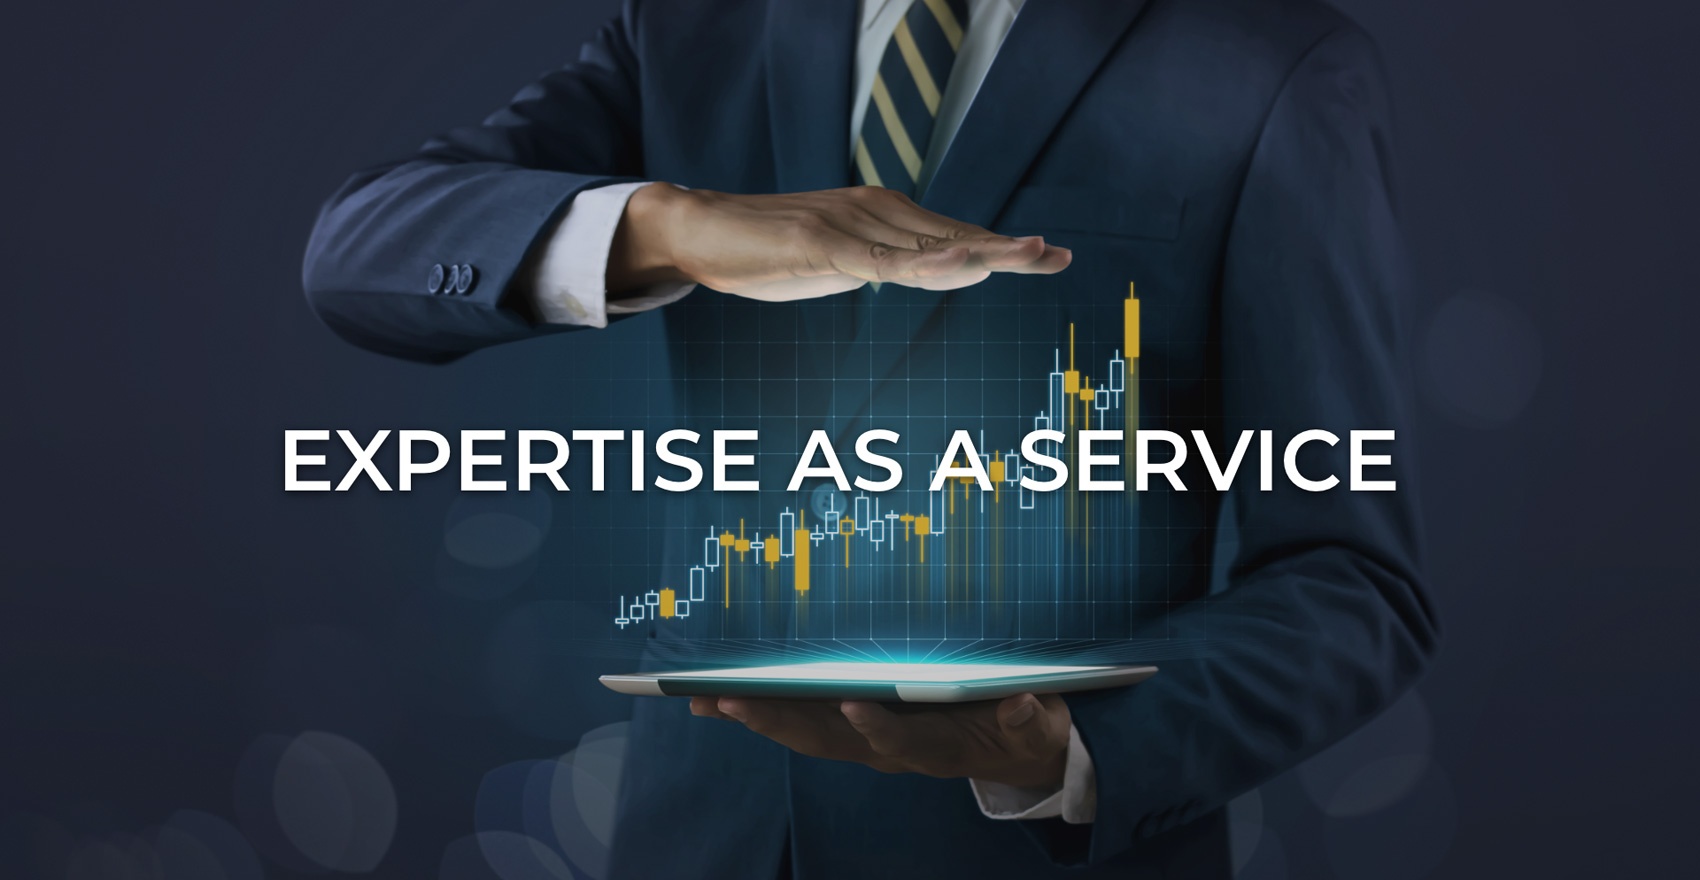 Expertise as a Service